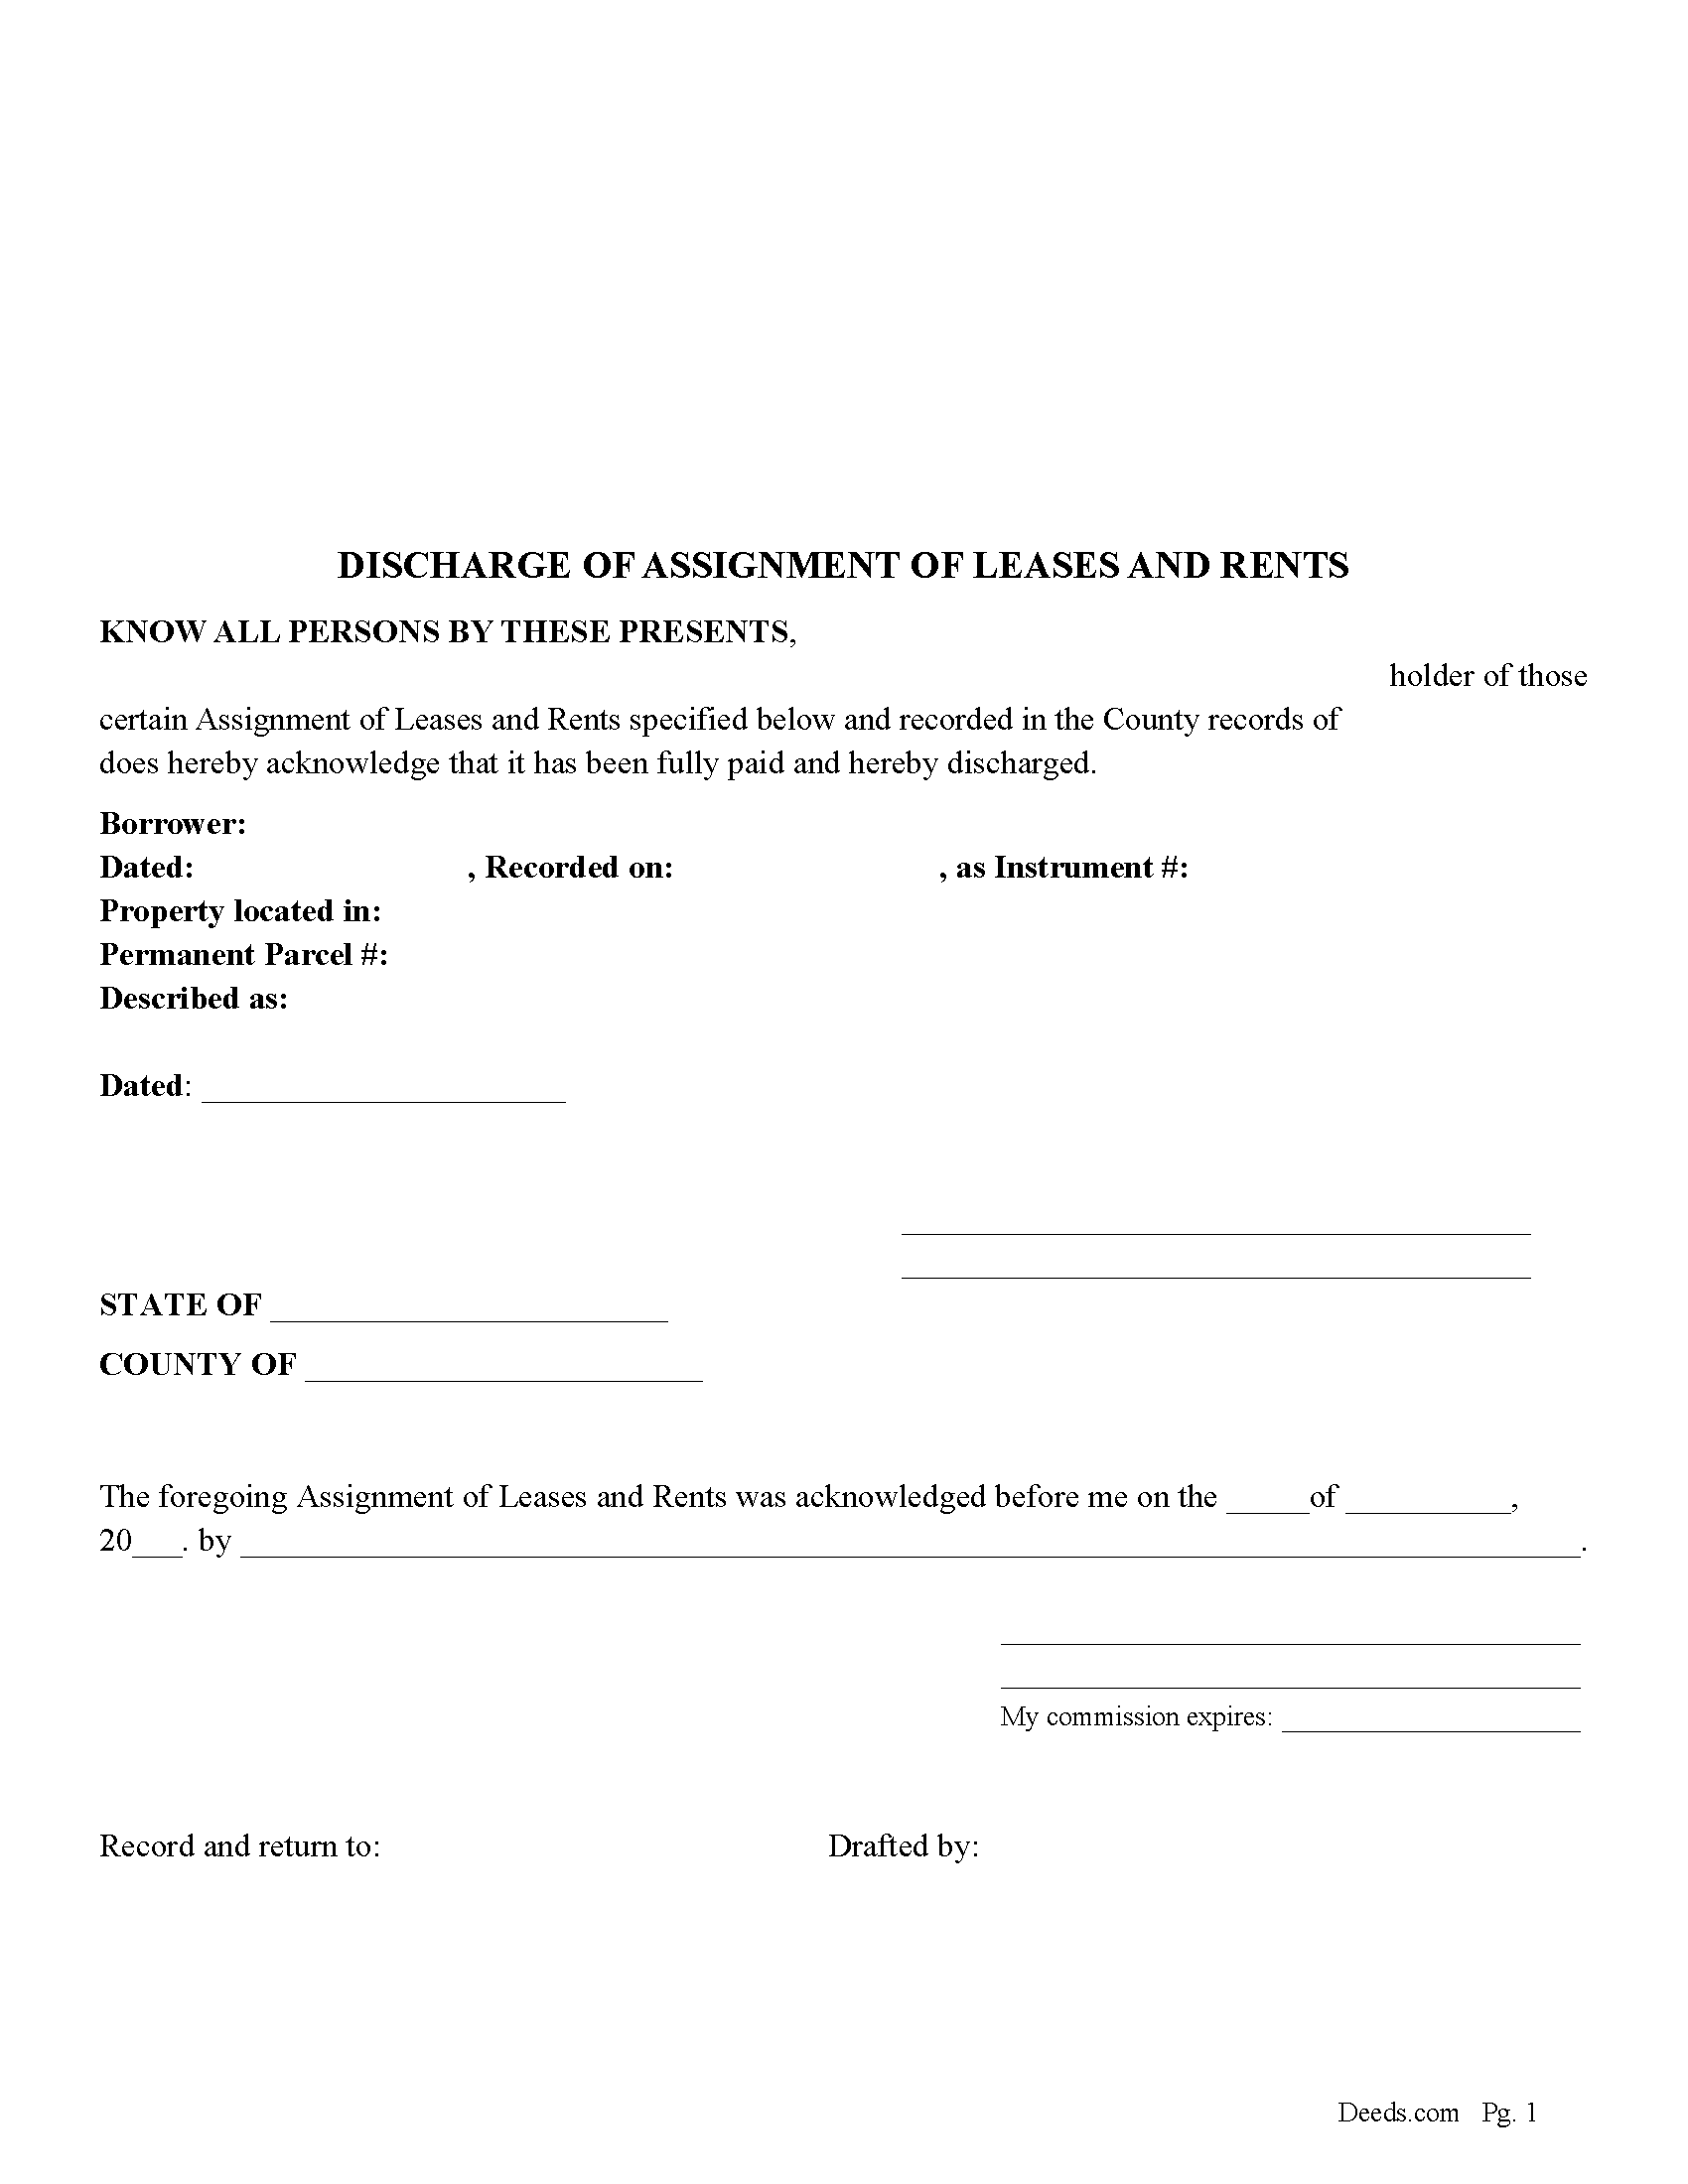 assignment of leases and rents endorsement